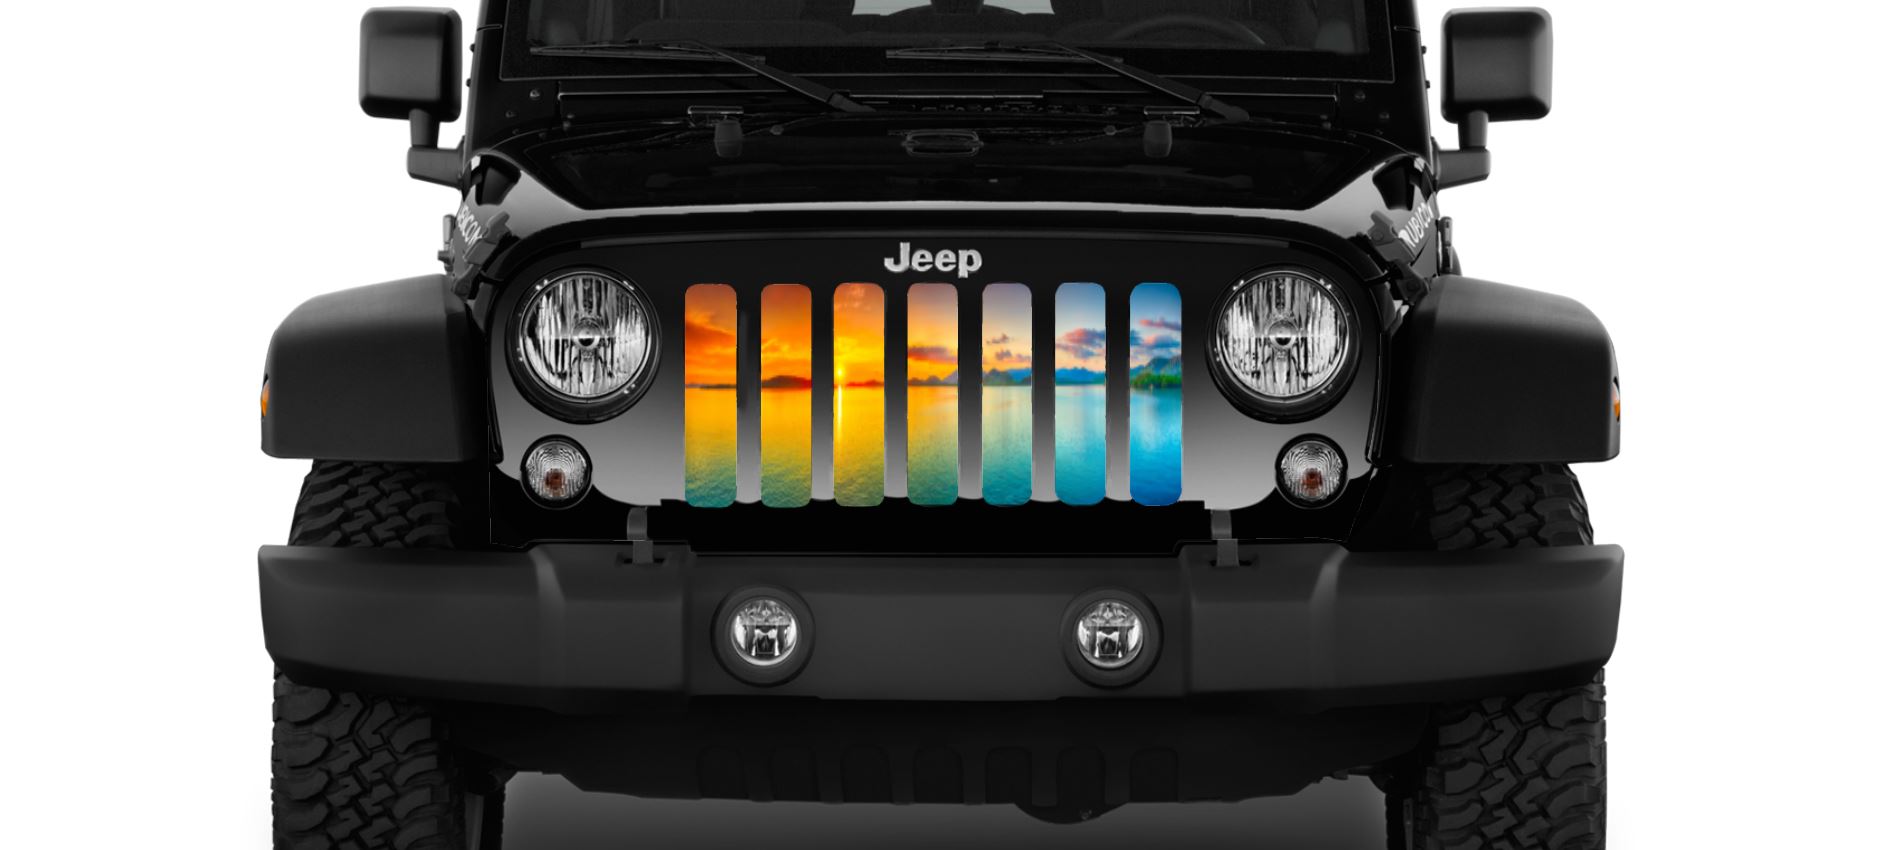 Island Time Grille Insert for Jeep | Dirty Acres